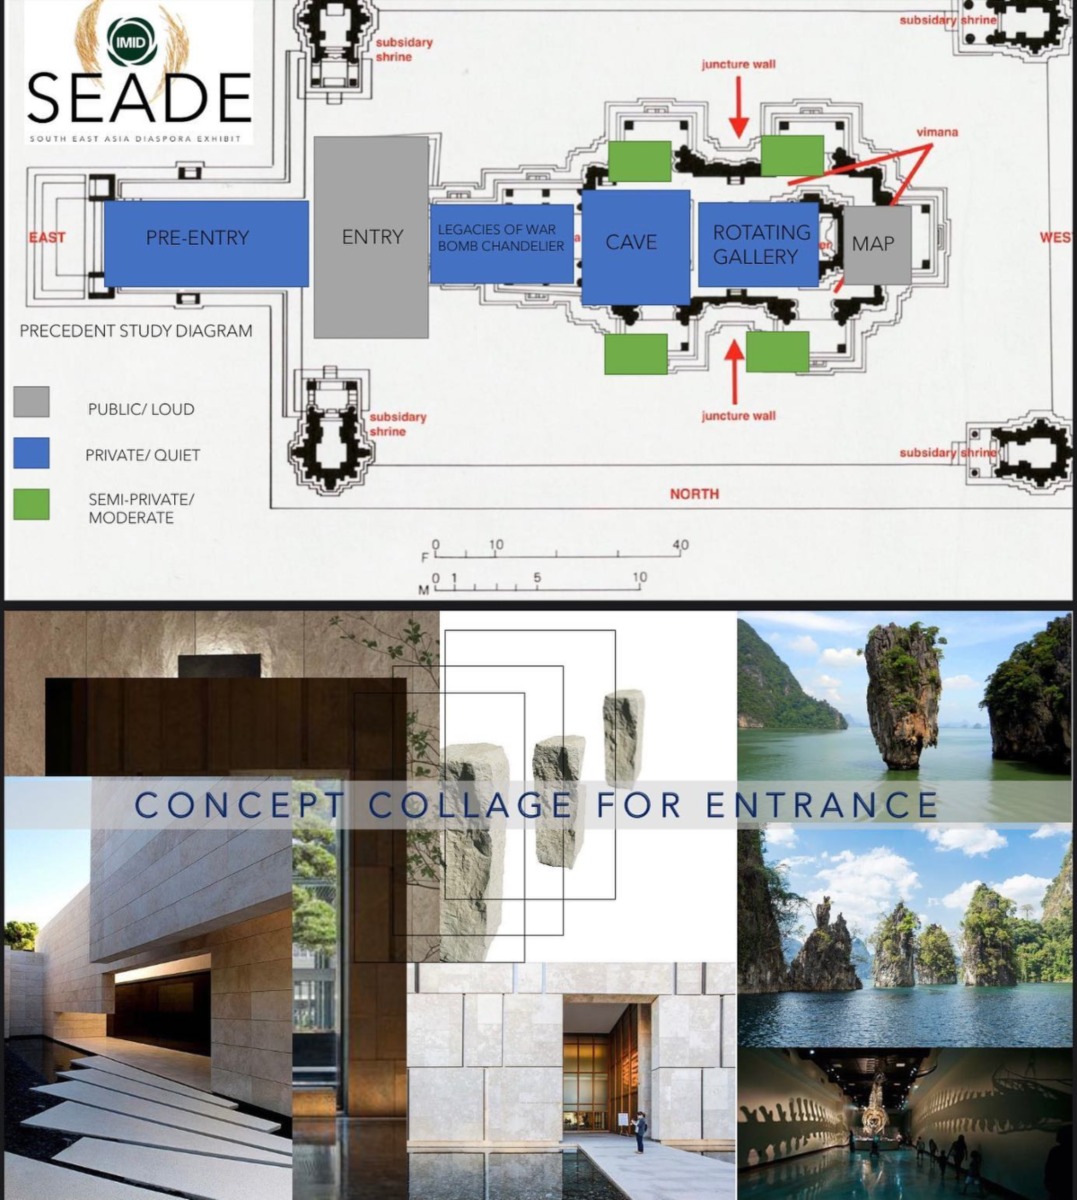 Floorplan and concept collage from Kiana Aros' design for the Southeast Asian Diaspora Exhibit at IMID.